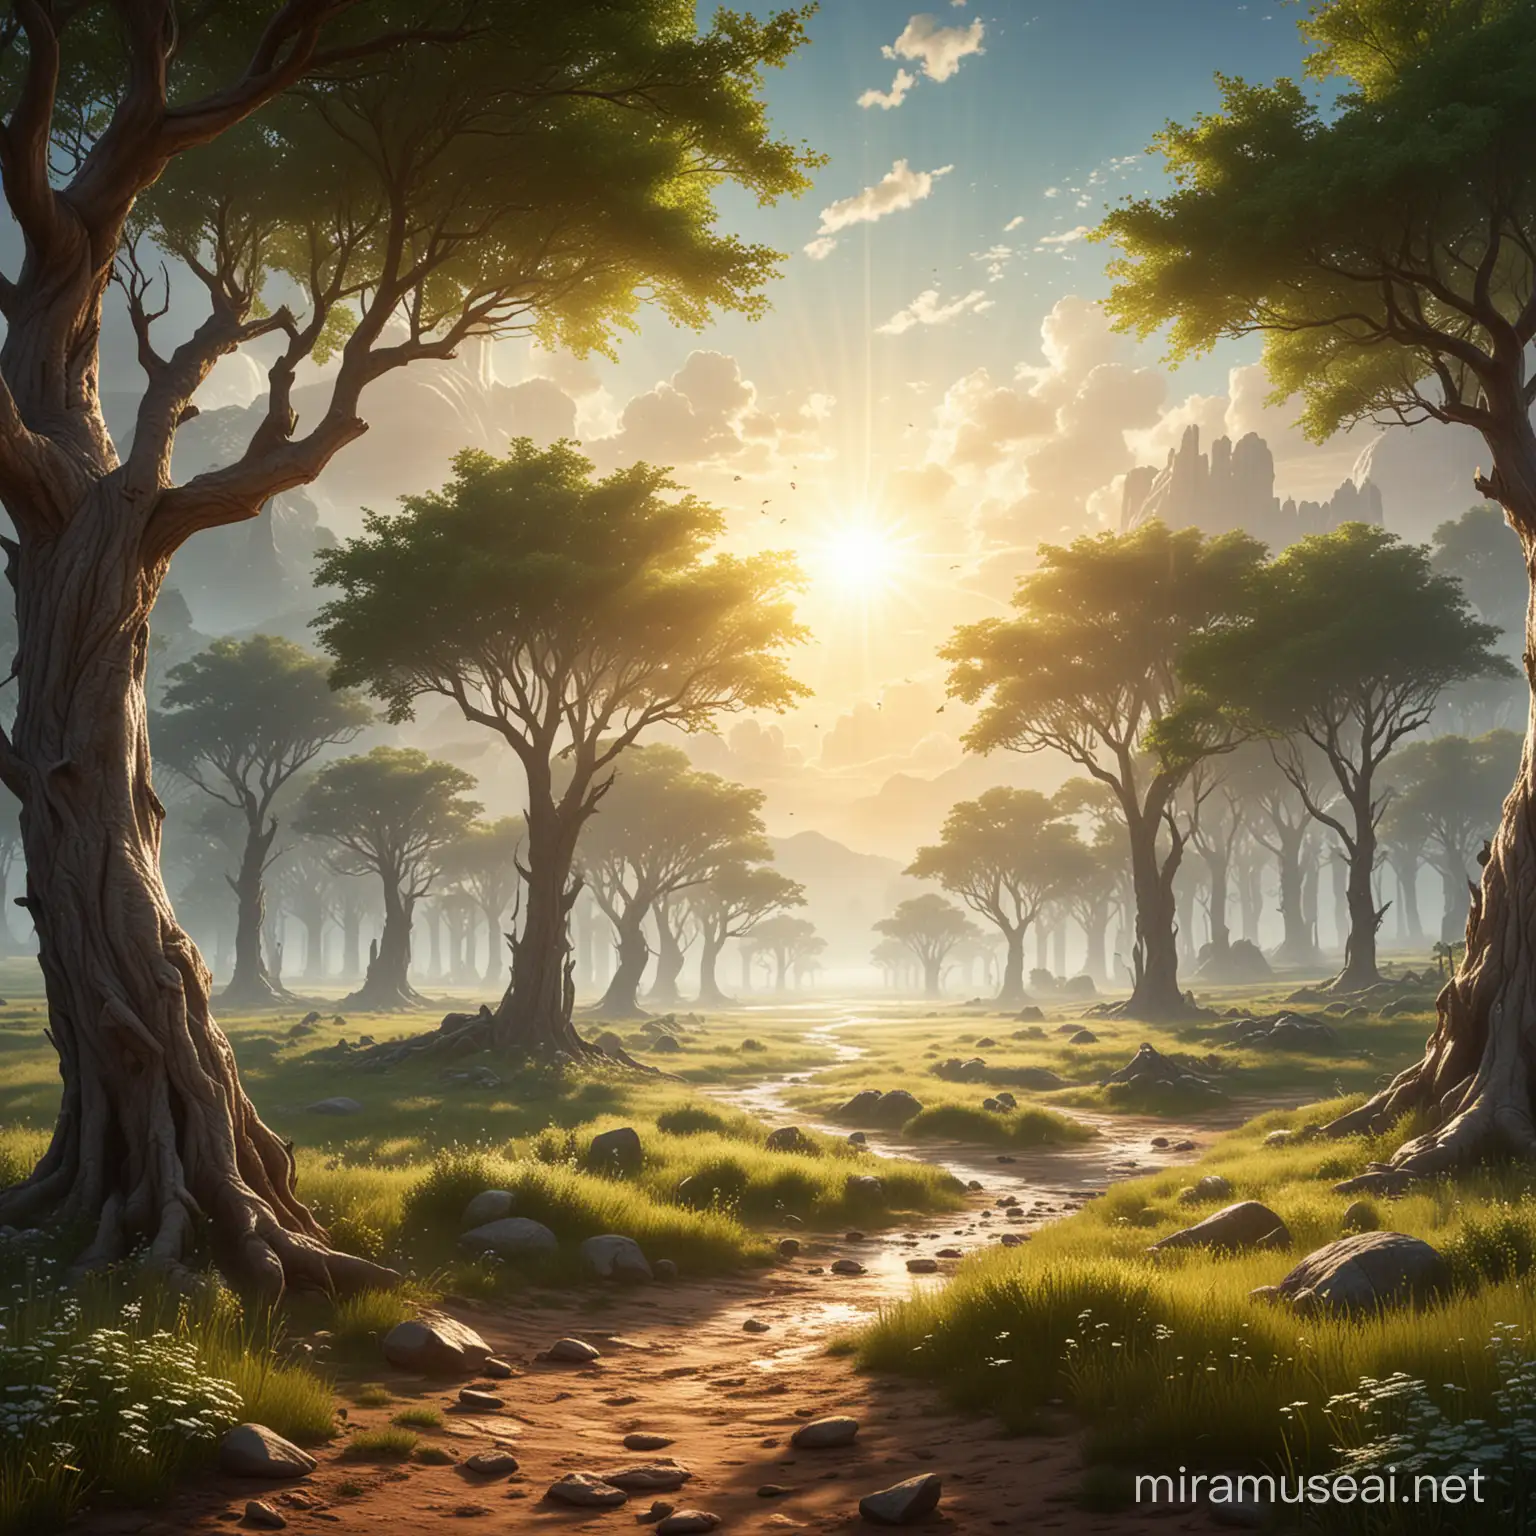 Epic fantasy scenery, divine plains with trees, sunlight